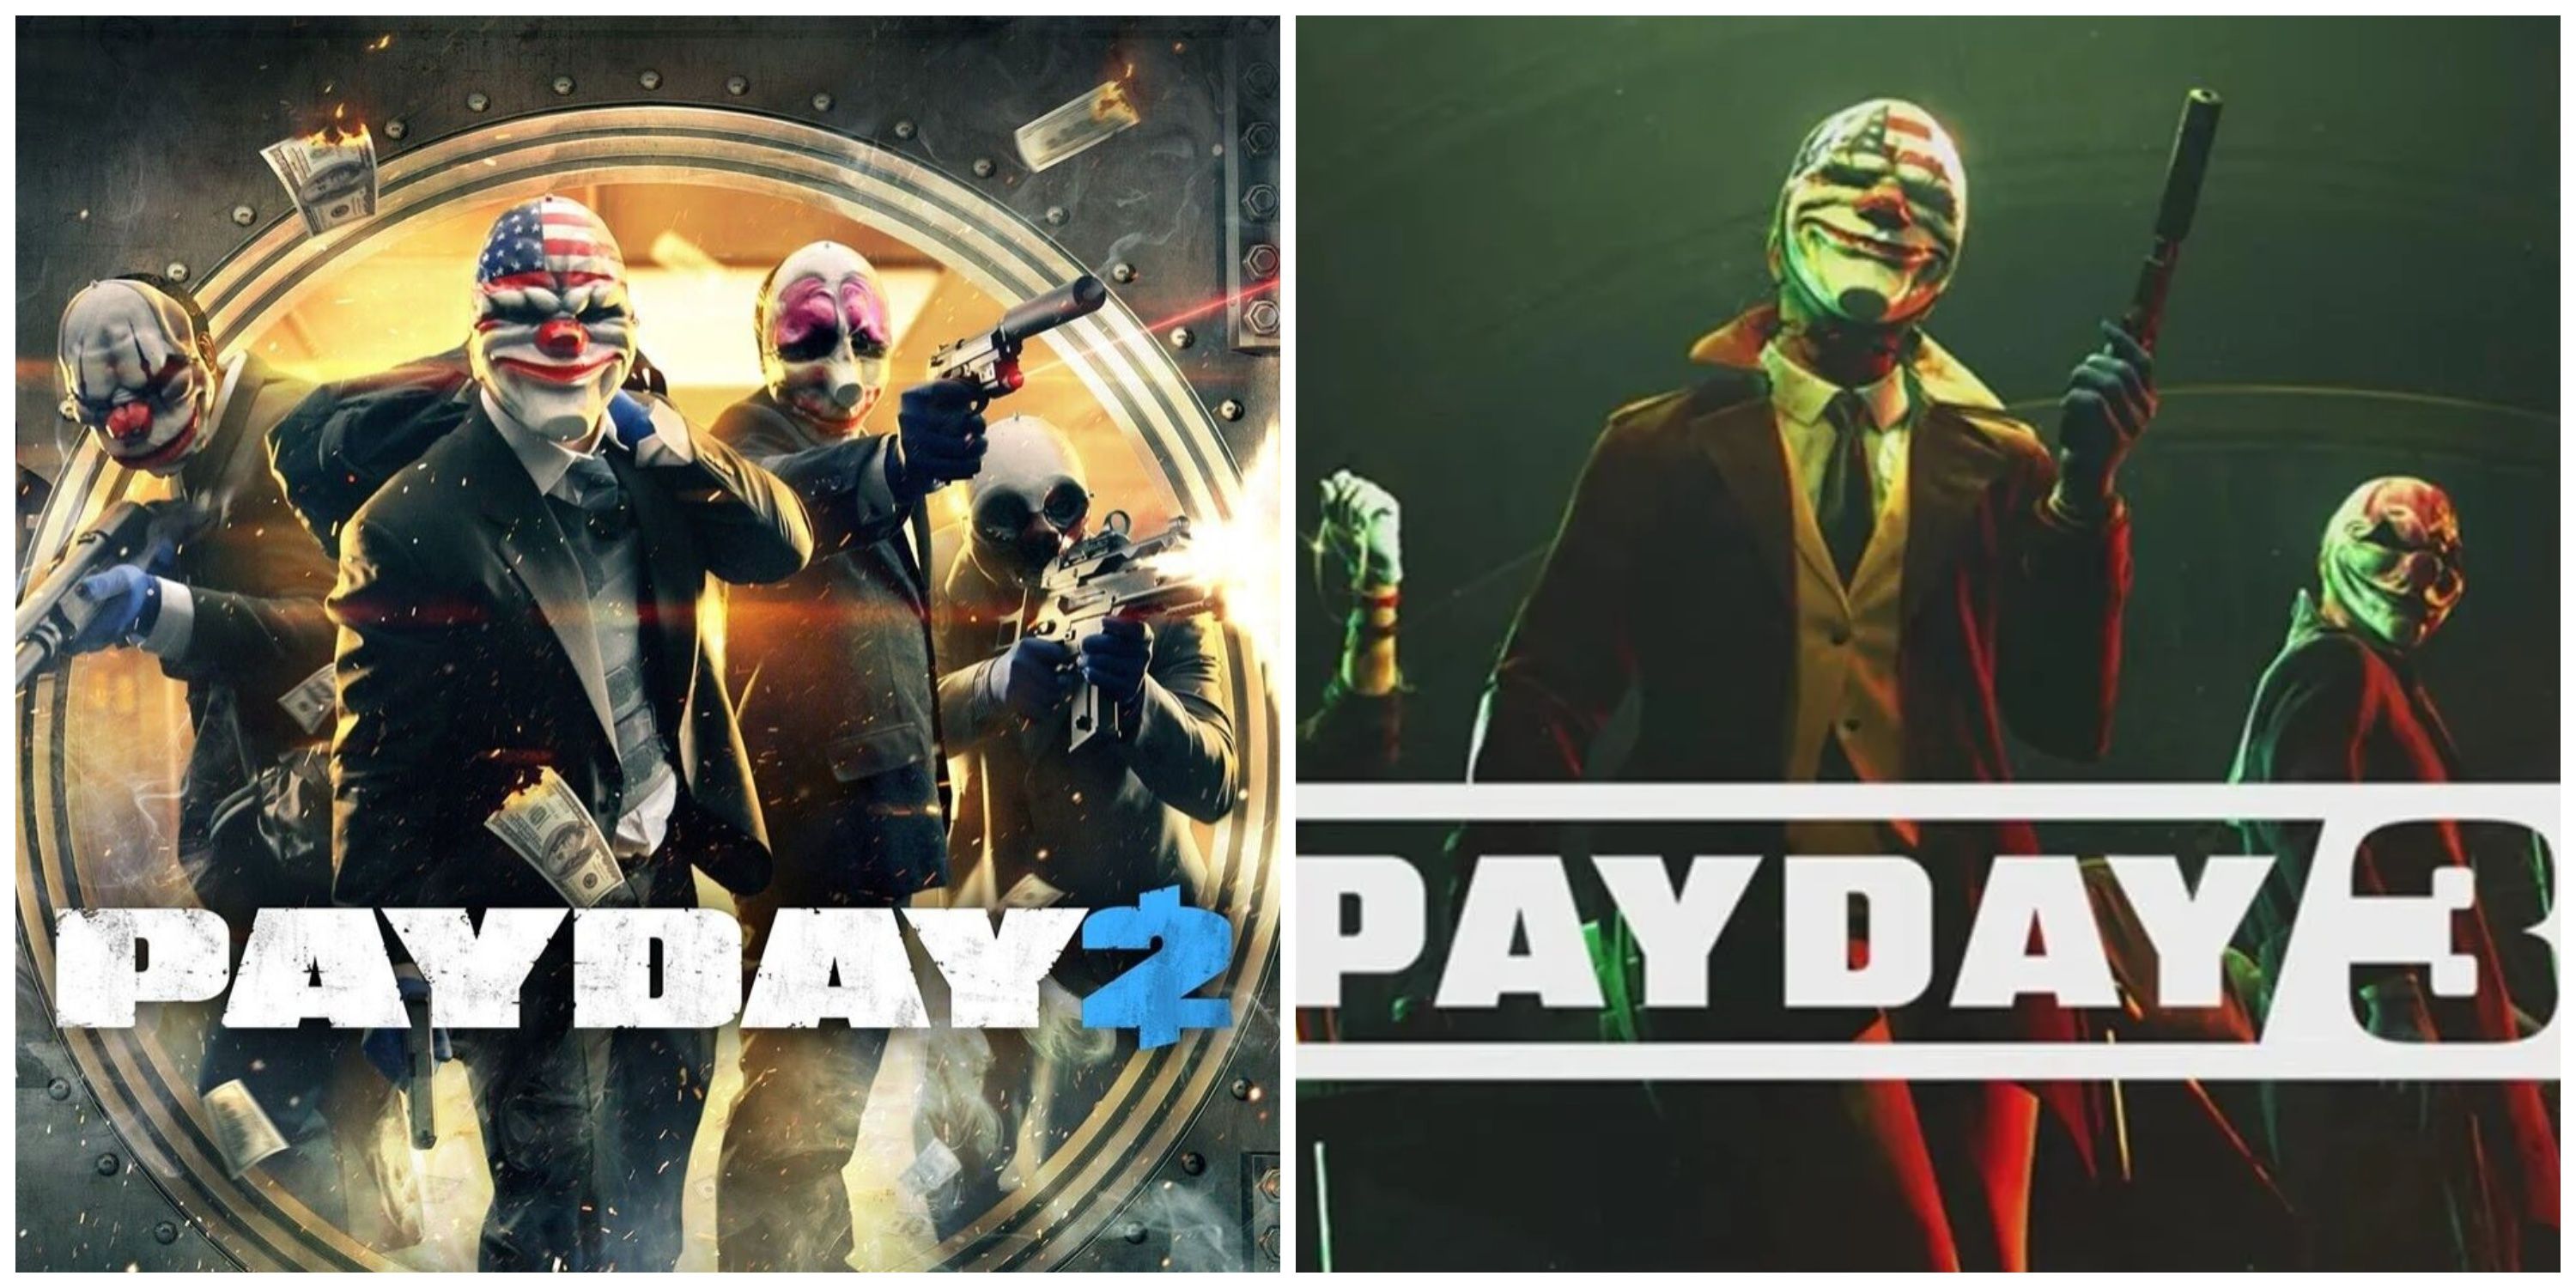 payday 2 poster and payday 3 poster